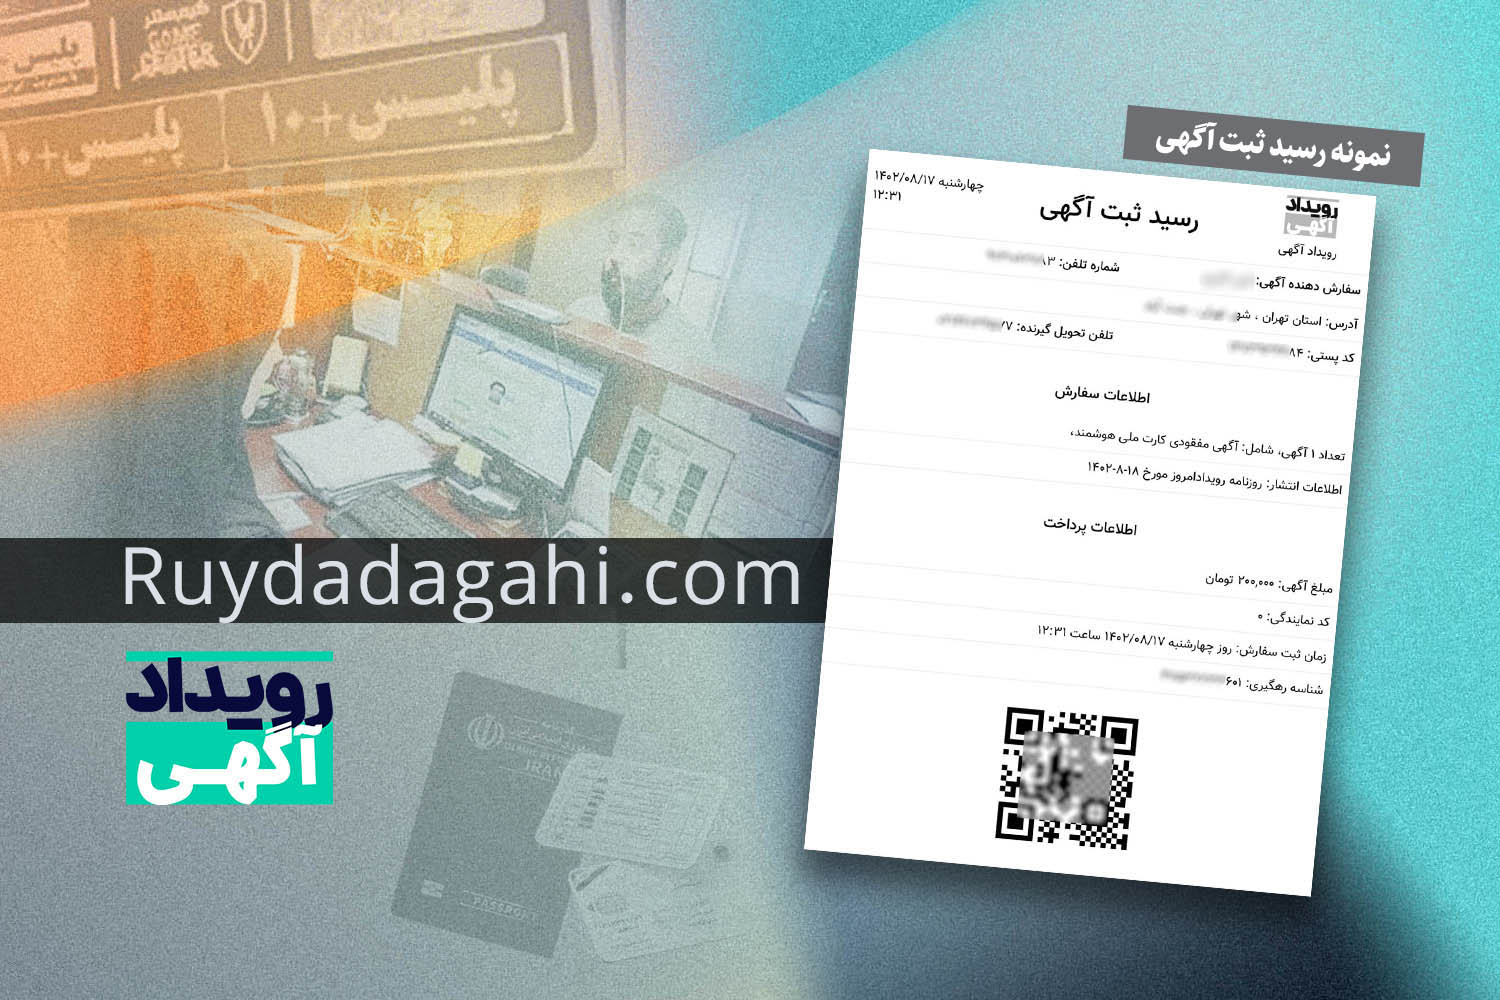 The receipt of advertisement registration in Alborz and Karaj for publication in a widely published newspaper is shown on the site of Ruydadagahi.com